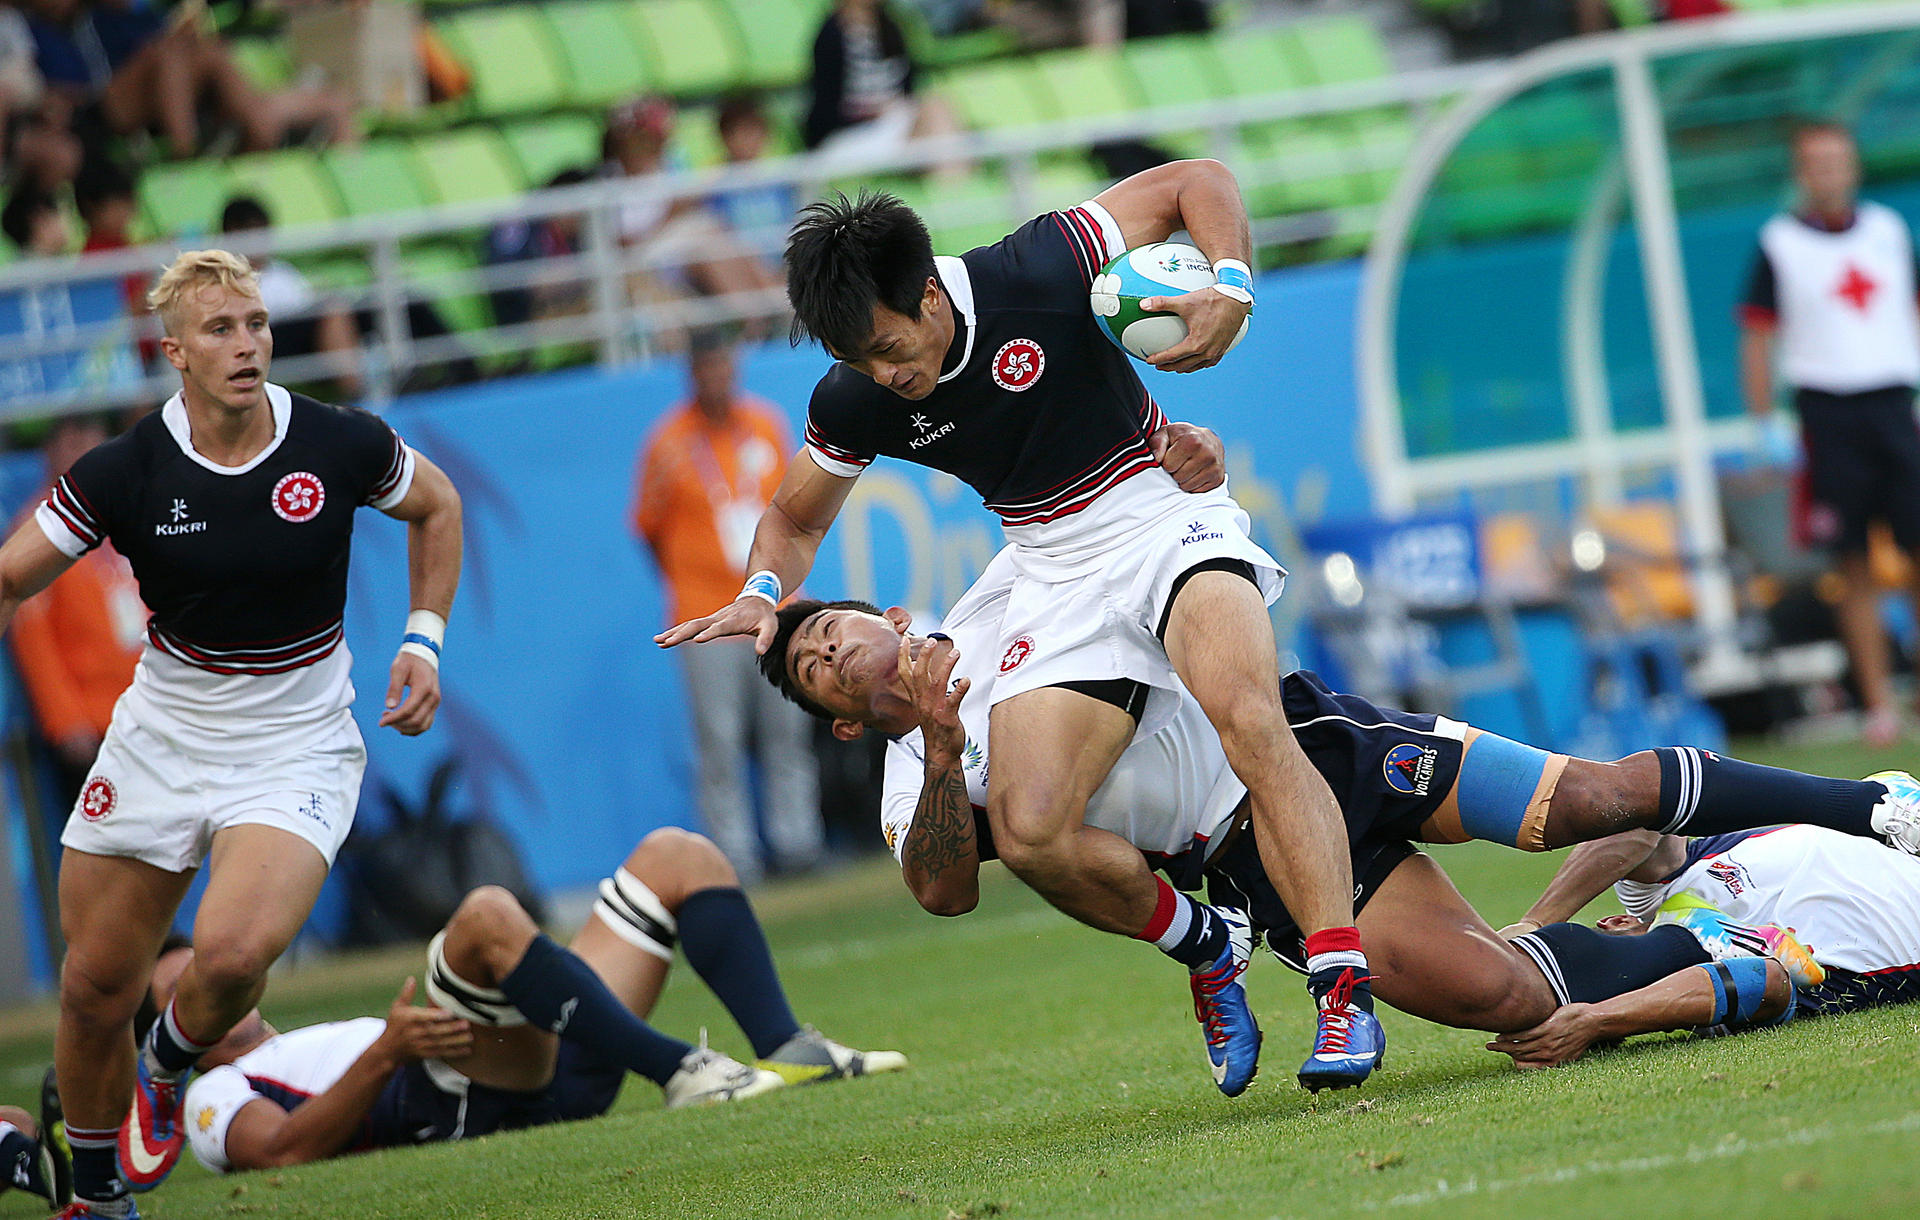 Hong Kong's Salom Yiu Kam-shing fends off a Philippines tackler in their pool game at the Namdong Asiad Rugby Field in Incheon. Photos: Nora Tam/SCMP